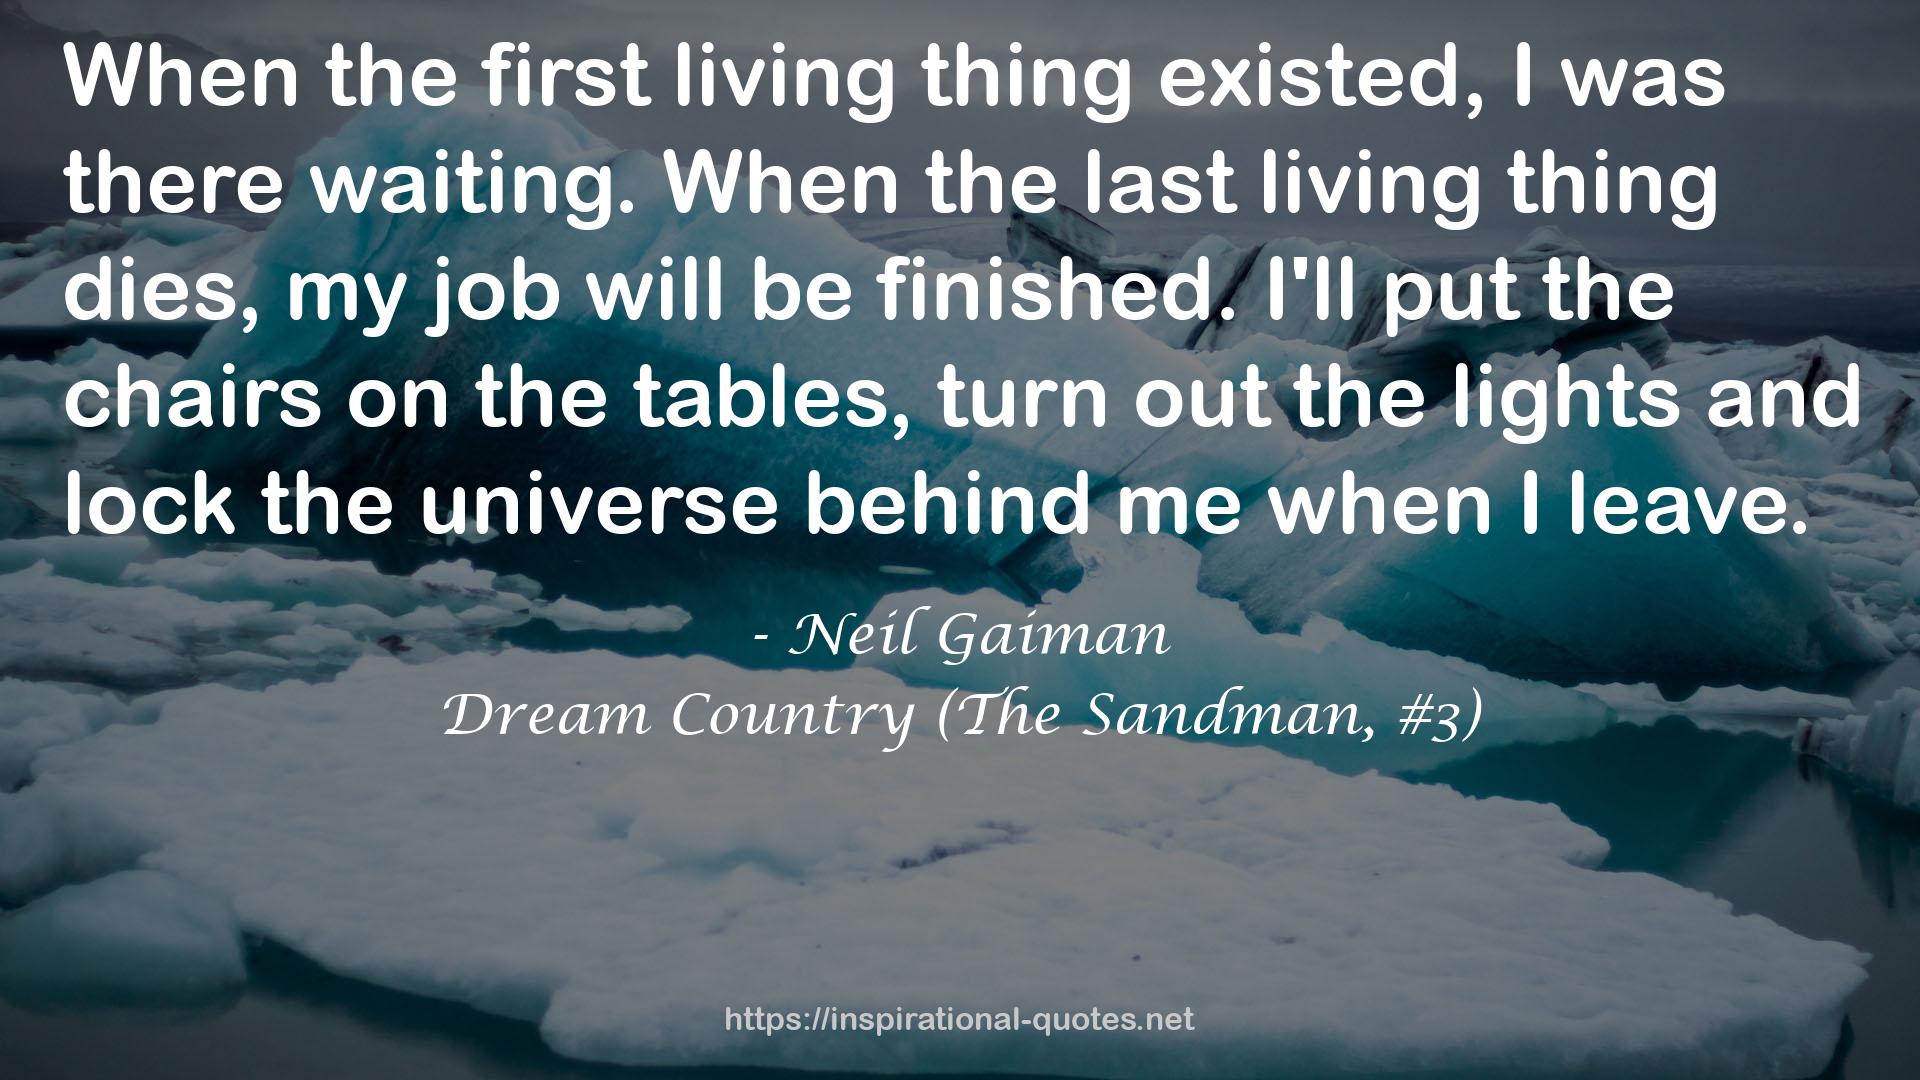 Dream Country (The Sandman, #3) QUOTES